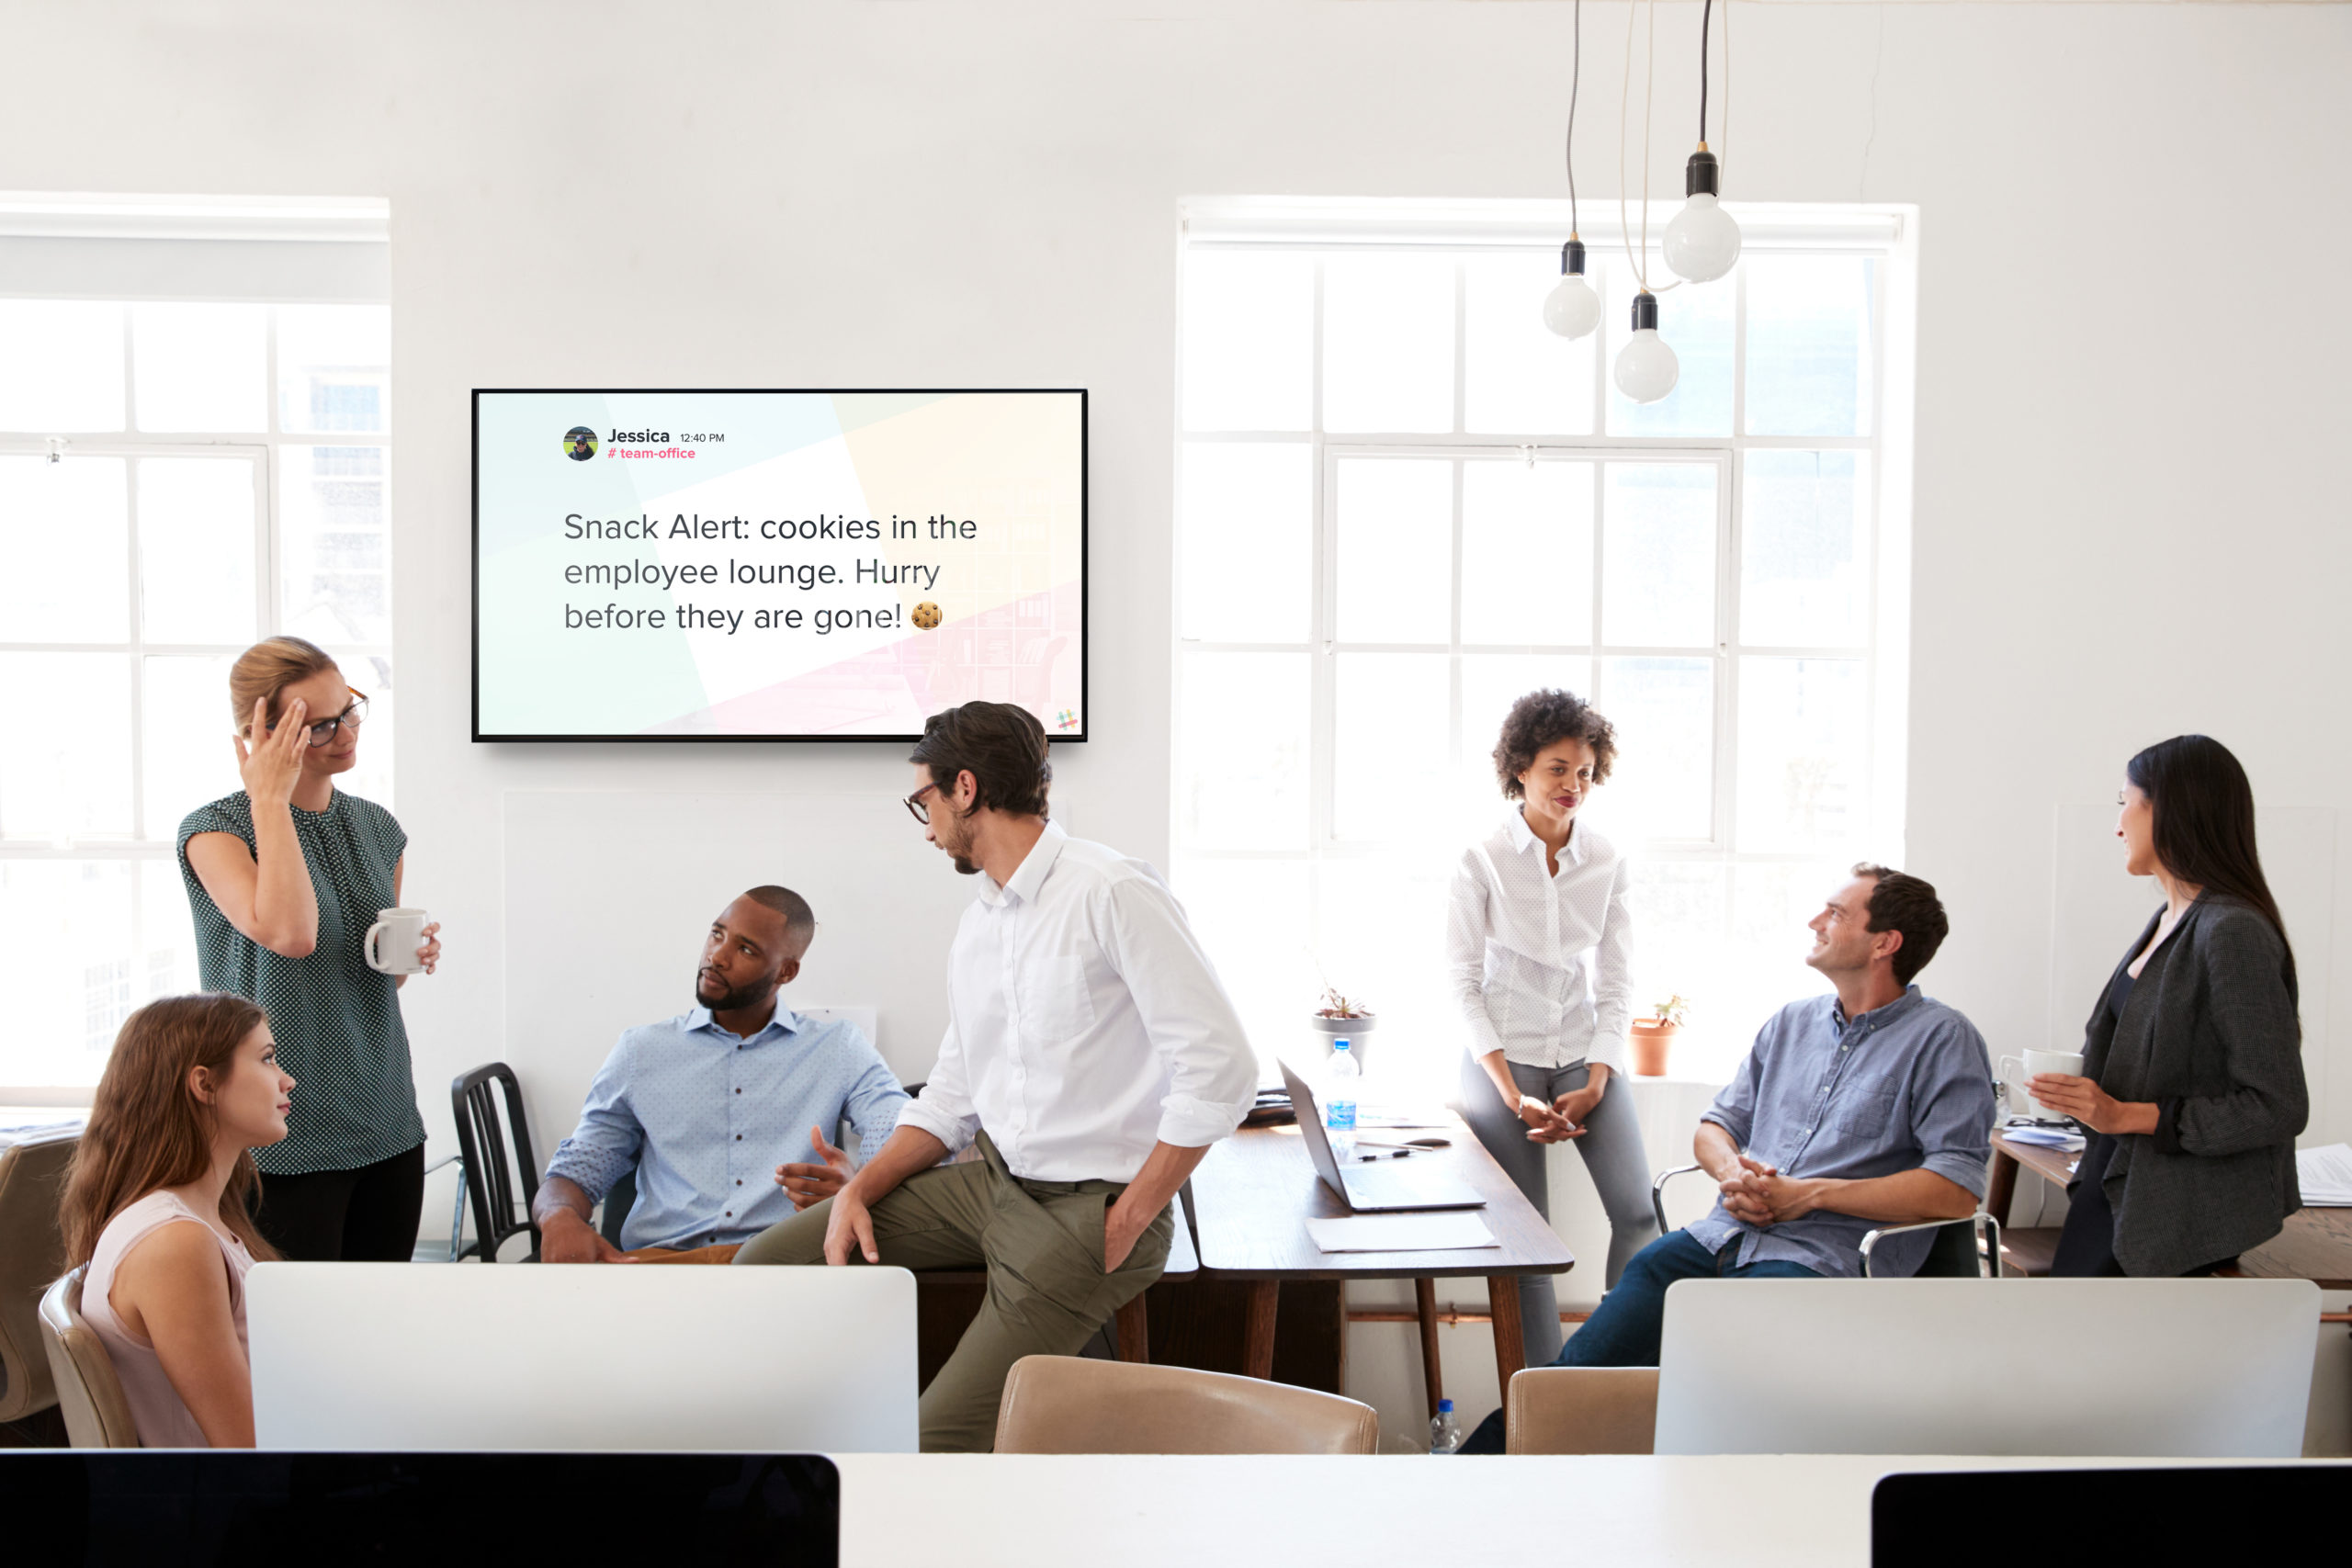 Team of diverse coworkers standing around table with digital signage for corporate communications on the wall behind them